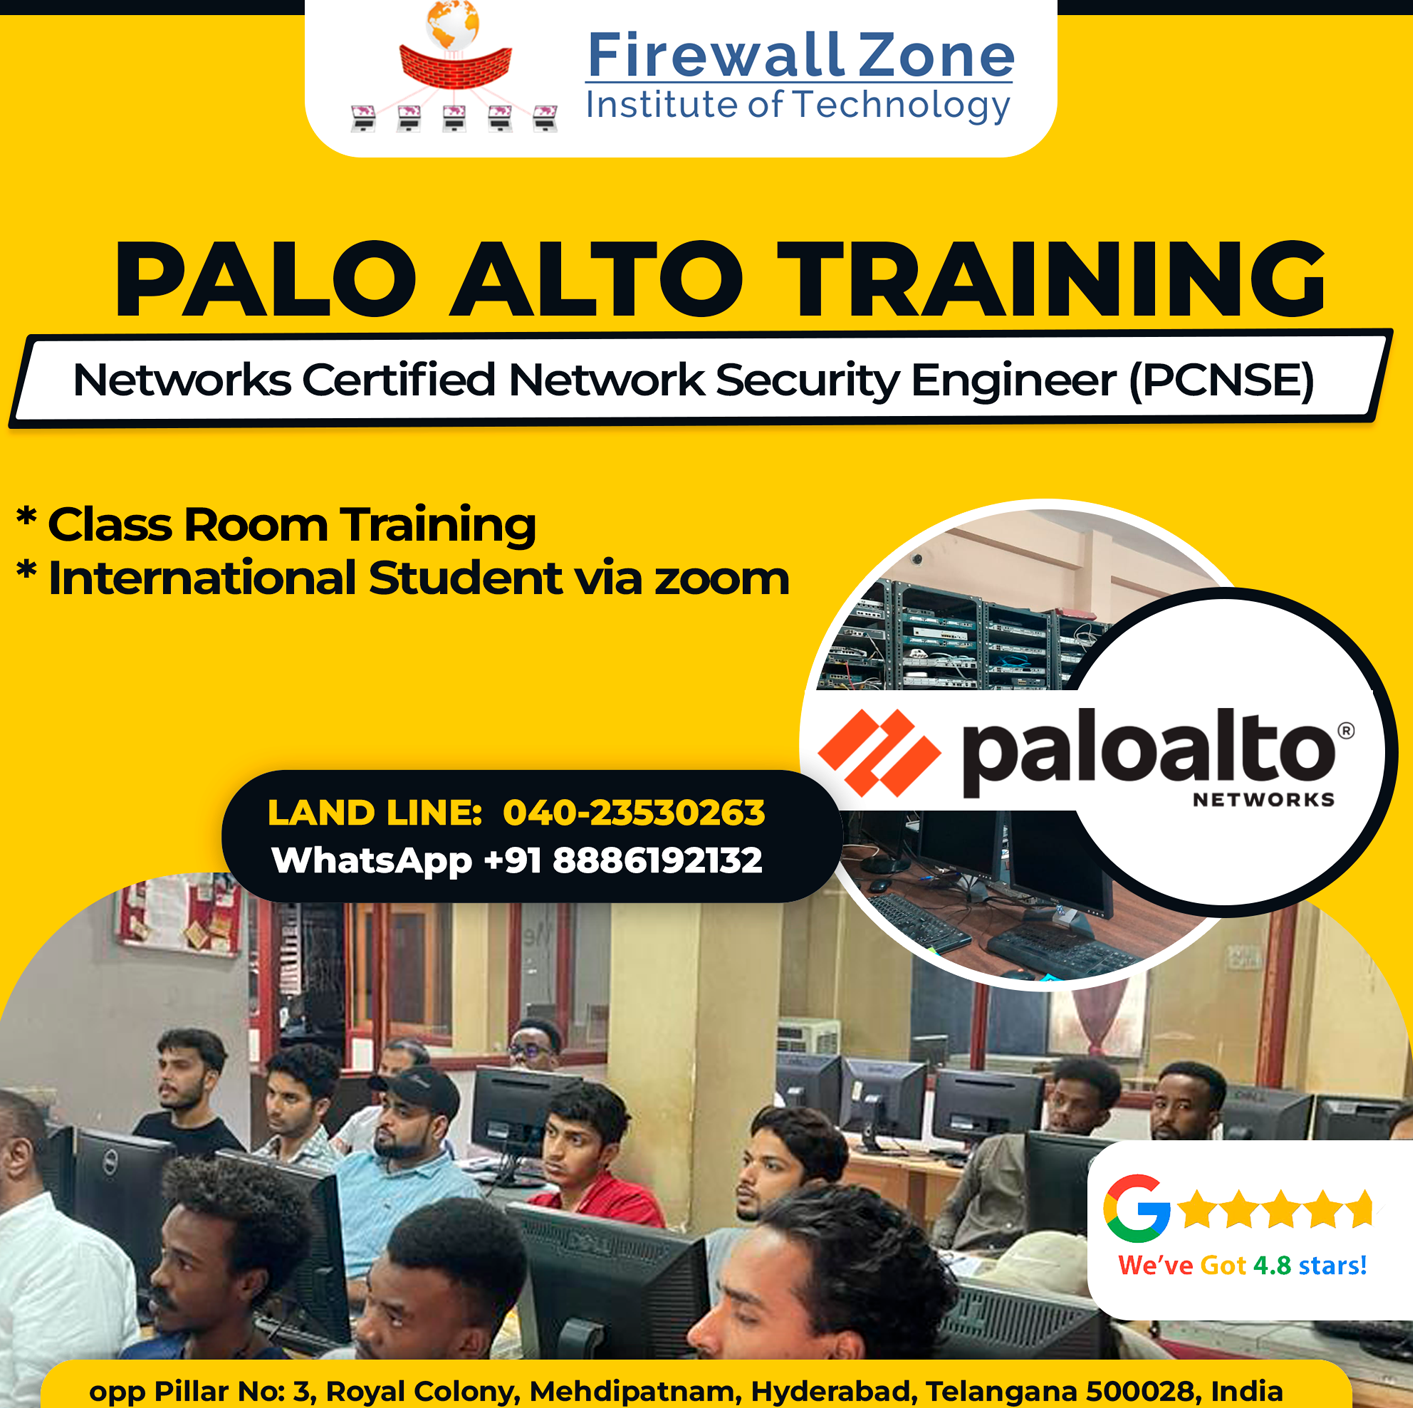 Palo Alto Networks Certified Network Security Engineer